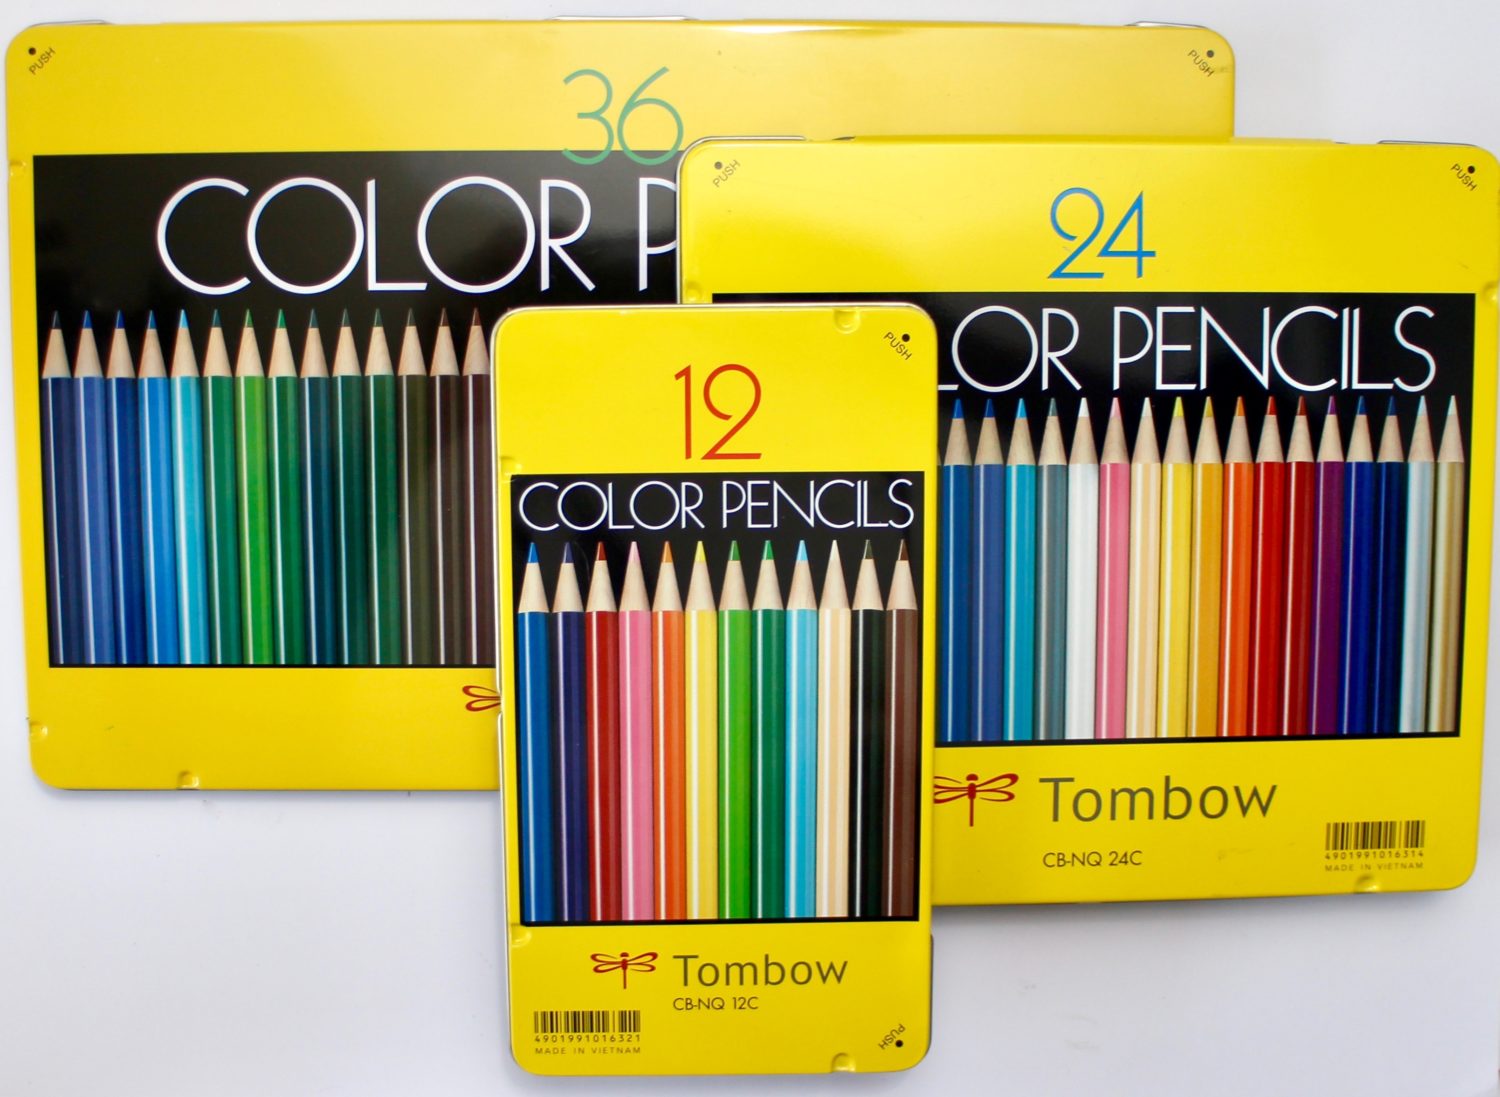 @mariebcreates #tombow #coloring #coloredpencil New colored pencils in 3 packs